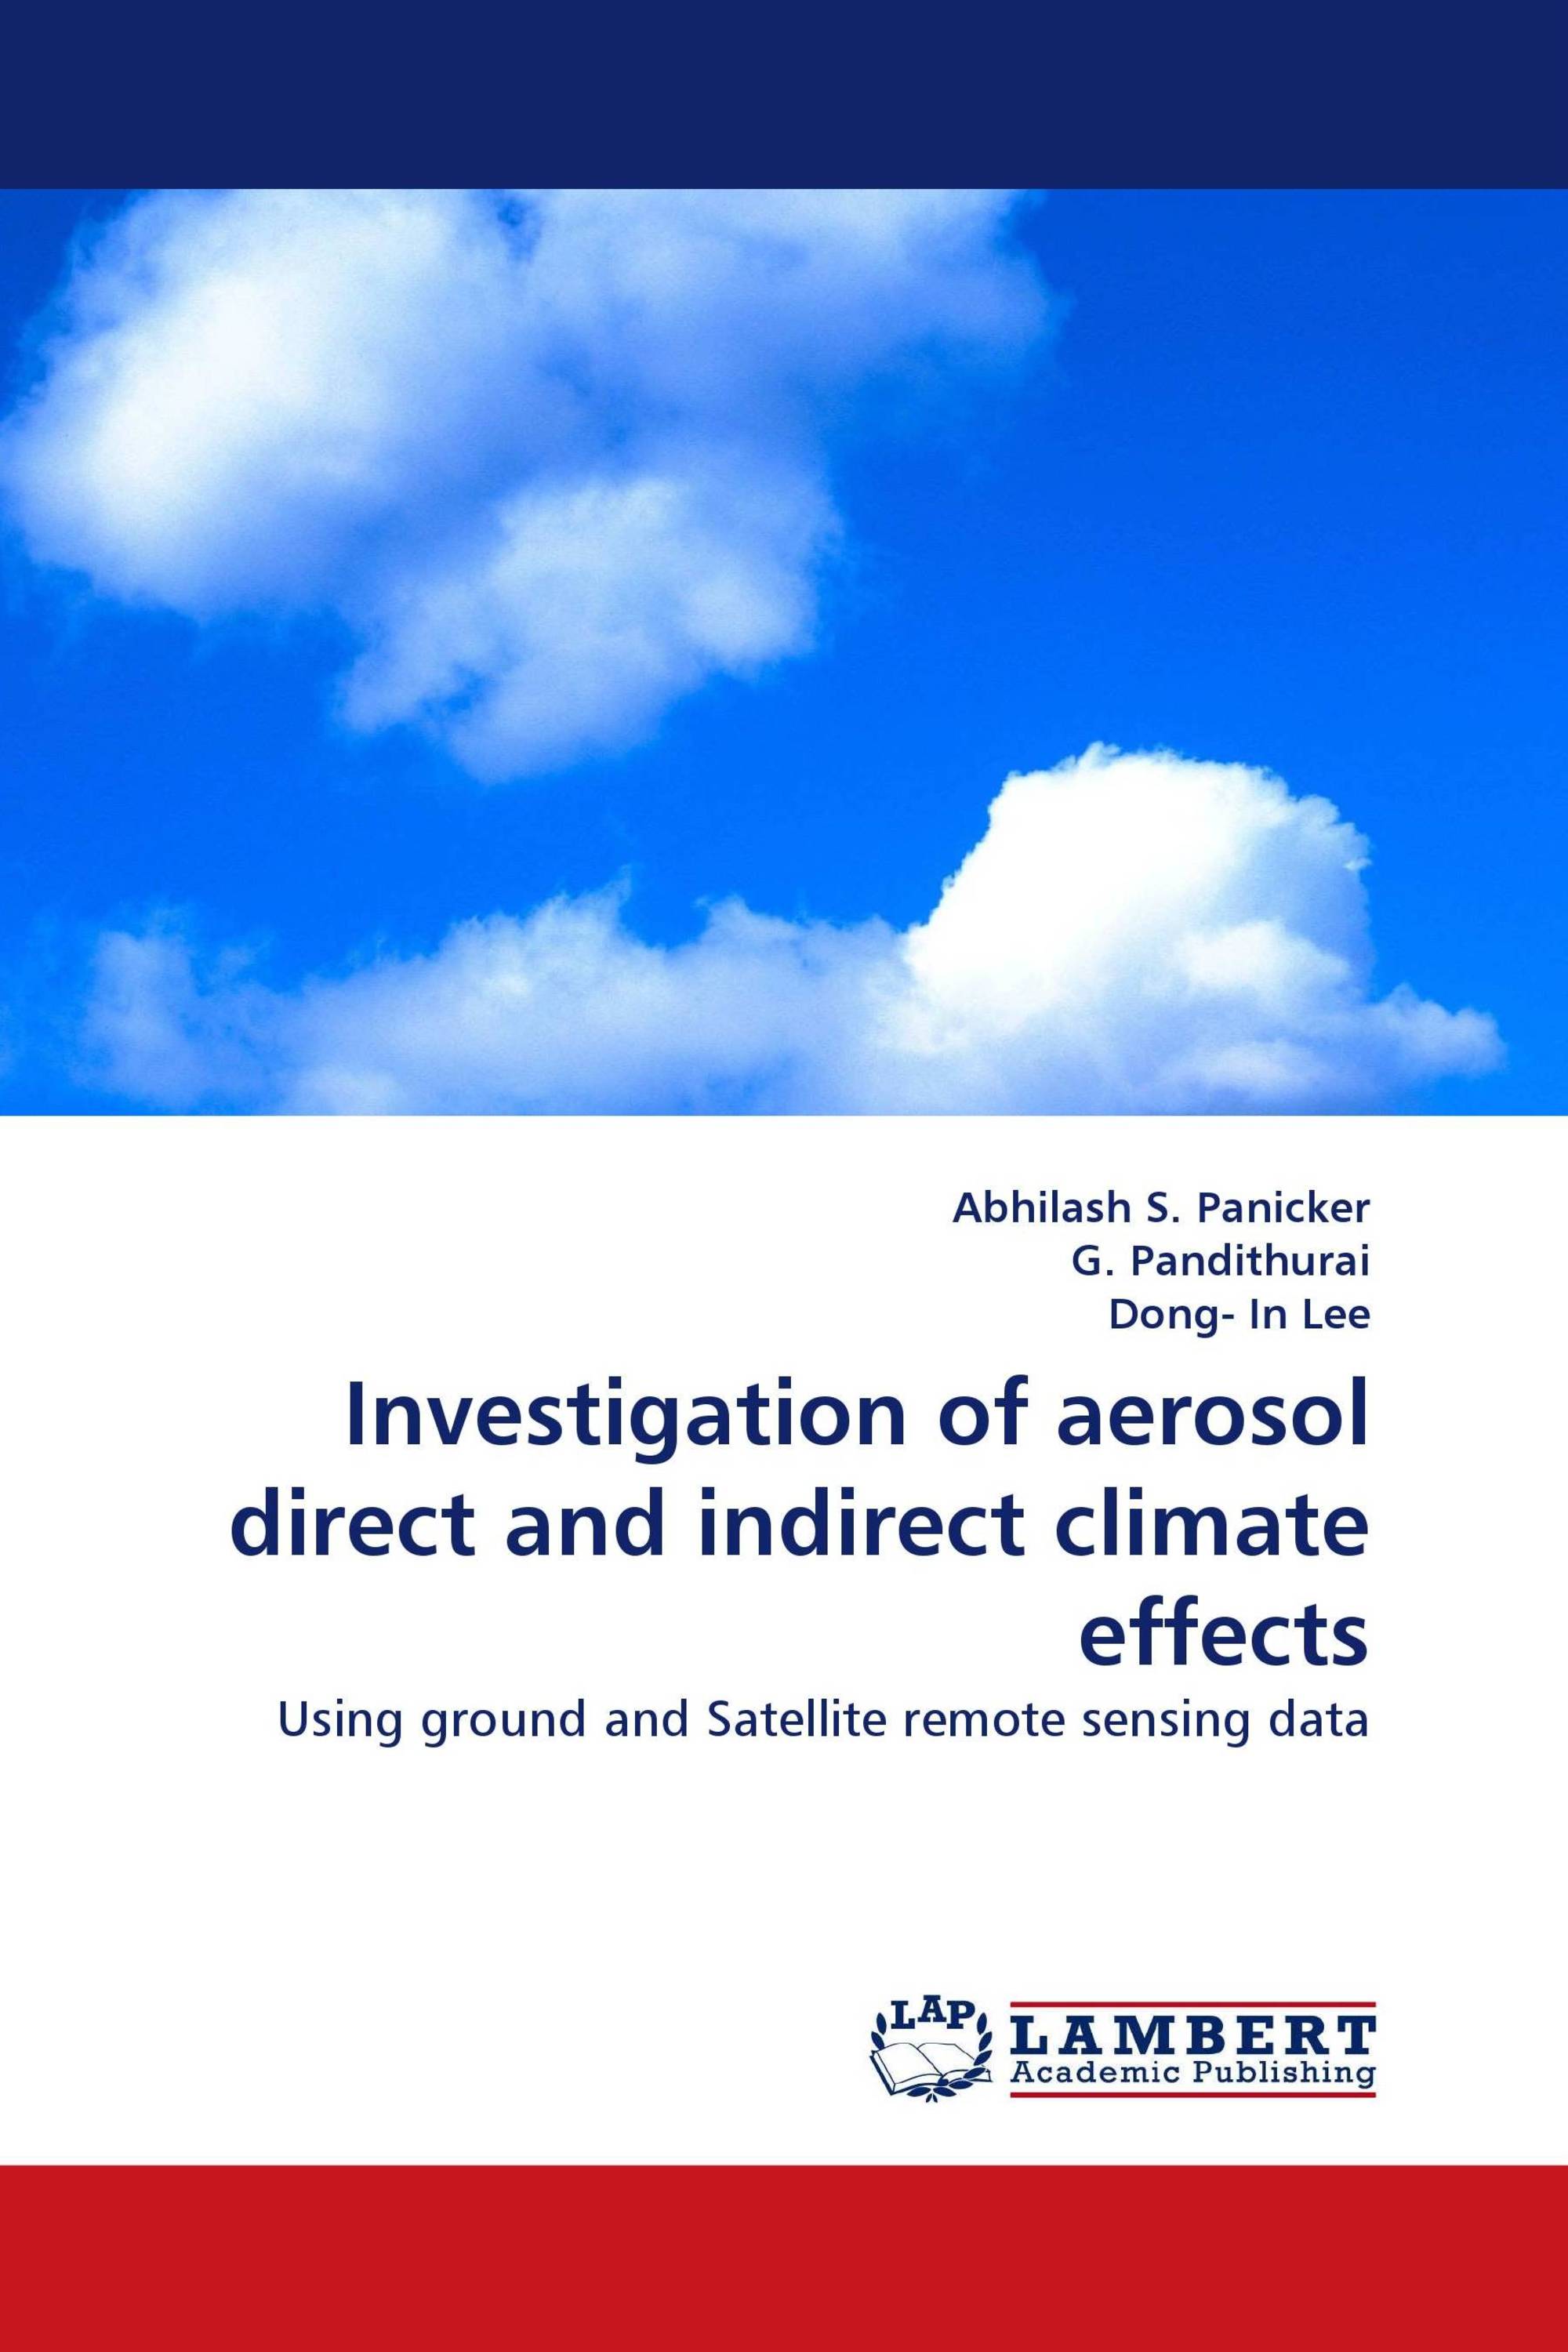 Investigation of aerosol direct and indirect climate effects